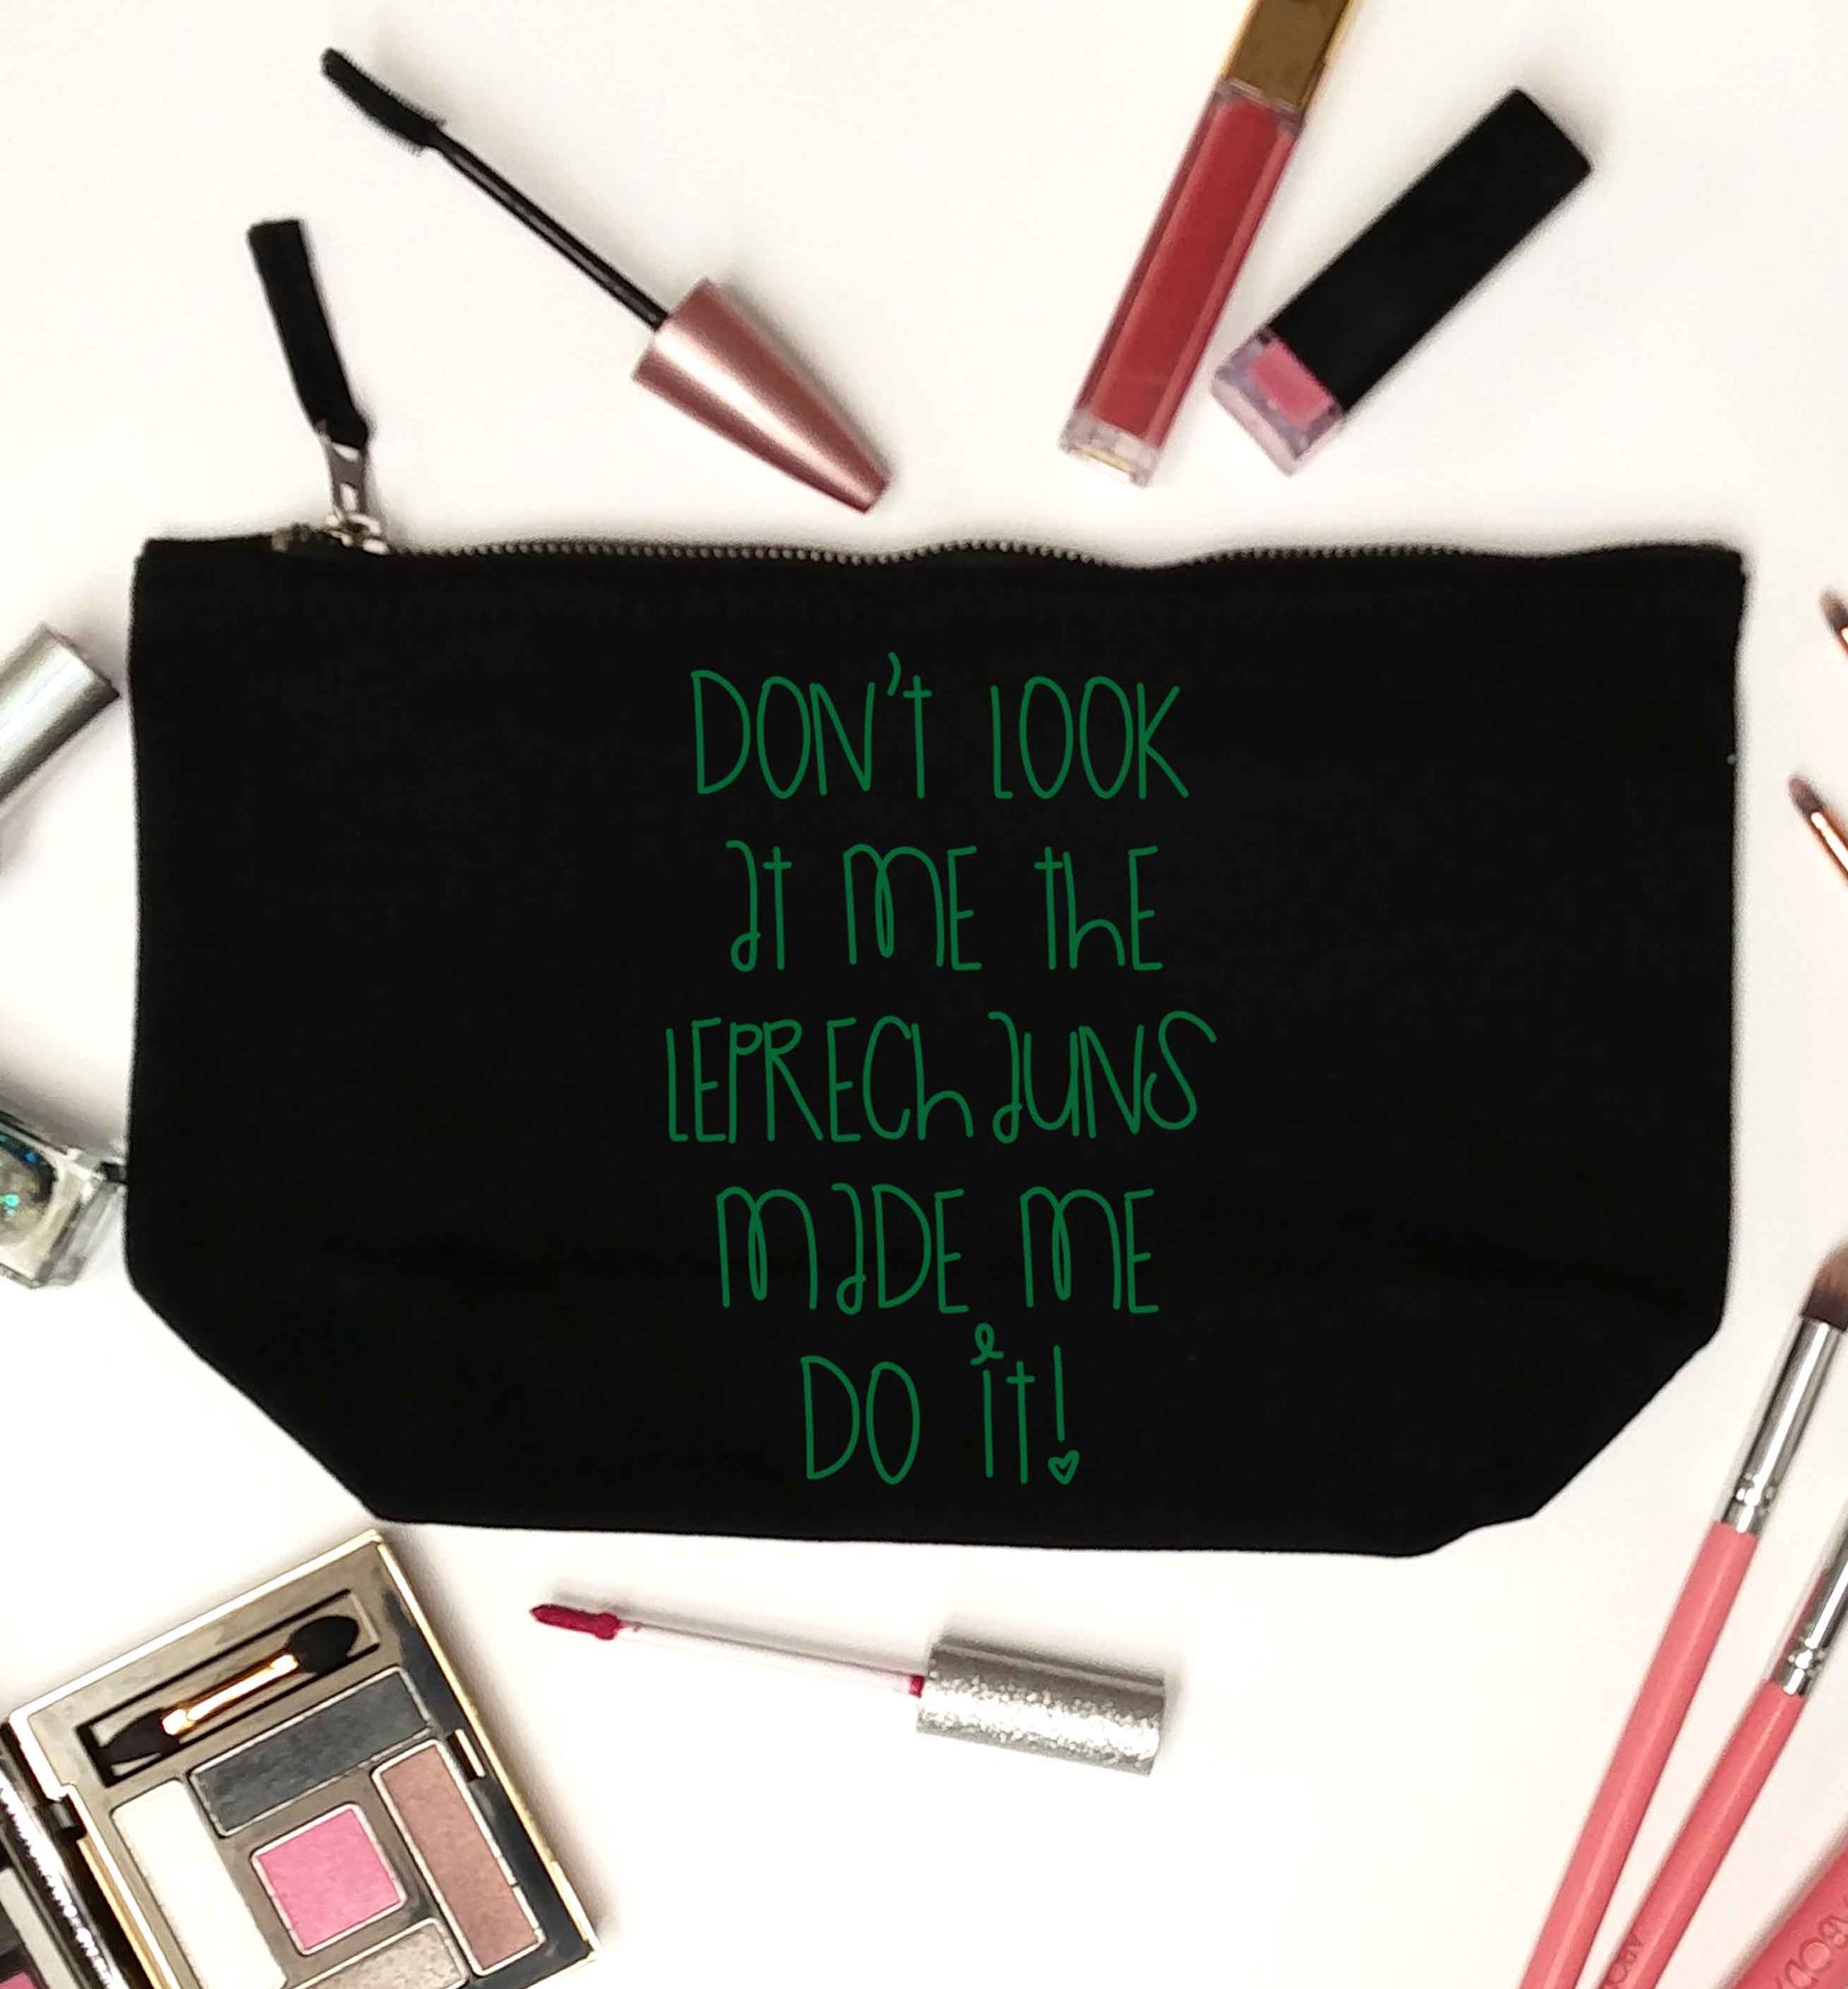 Don't look at me the leprechauns made me do it black makeup bag